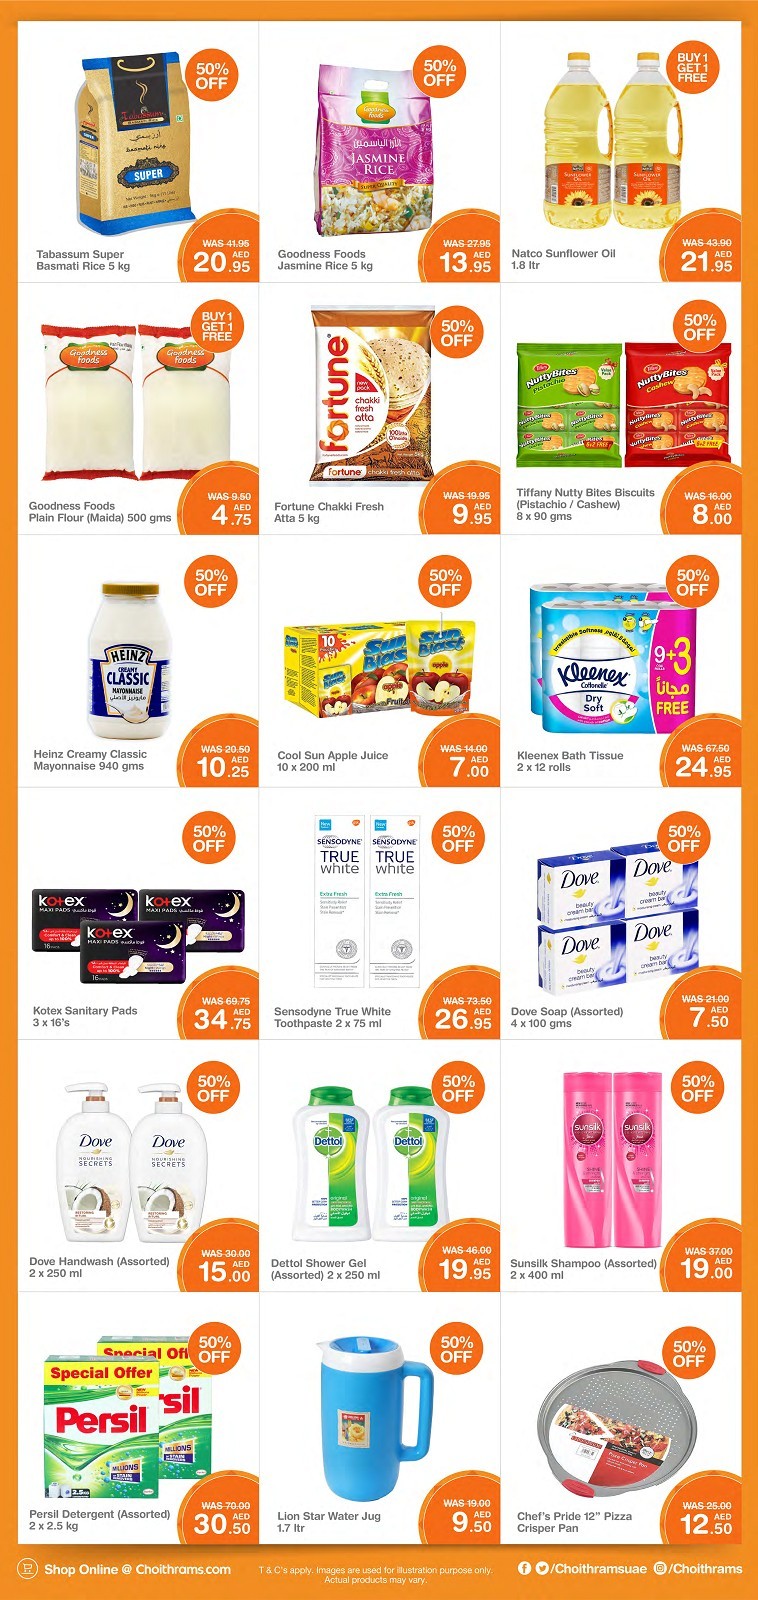 Choithrams Friday Offers